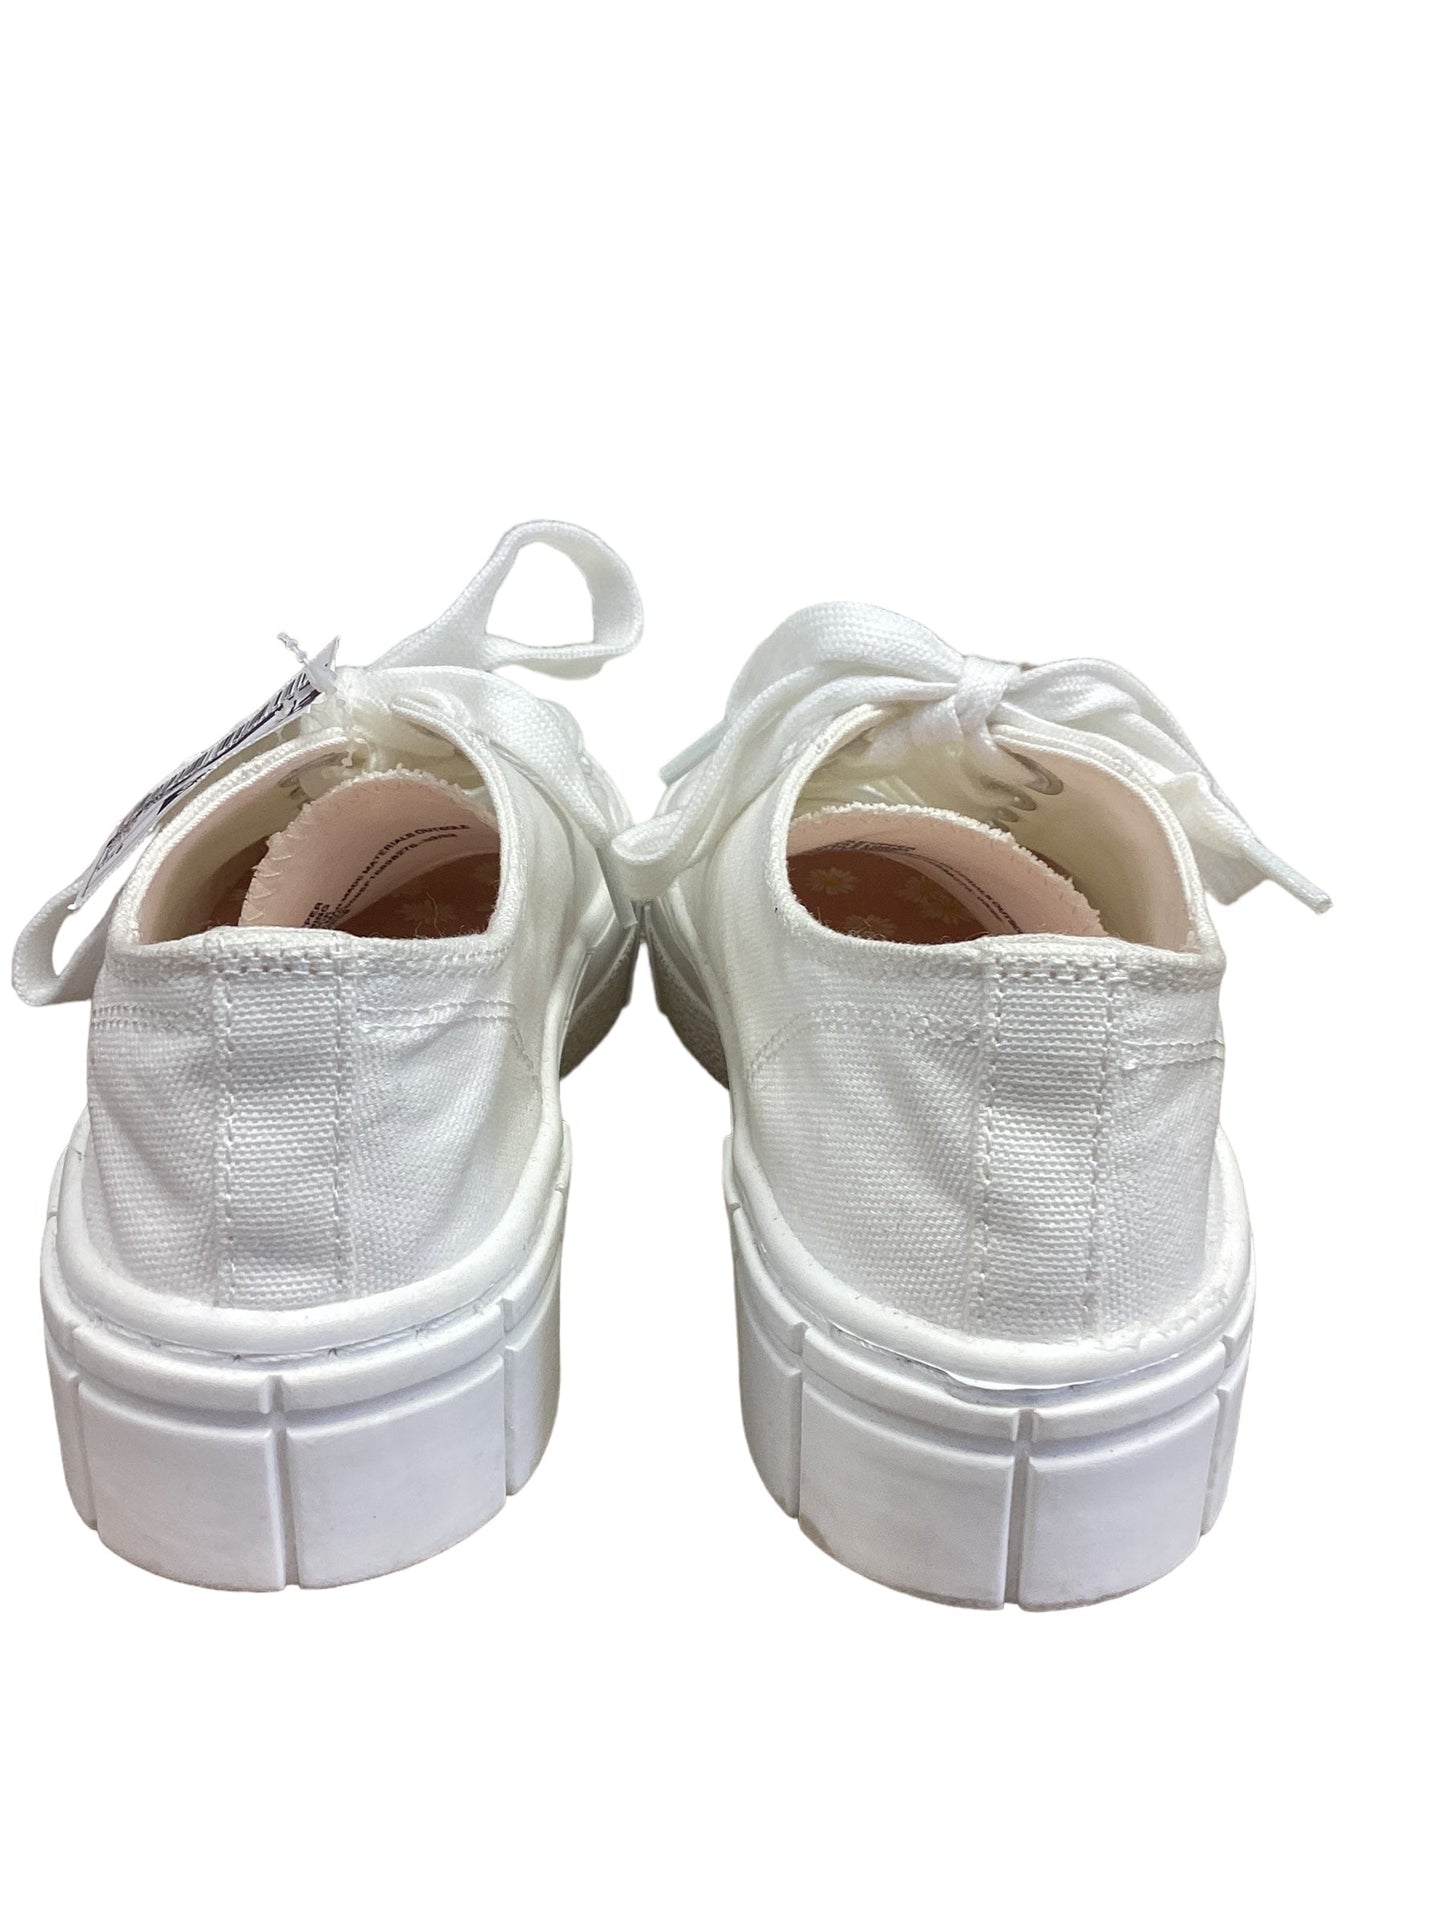 White Shoes Sneakers Mad Love, Size 8